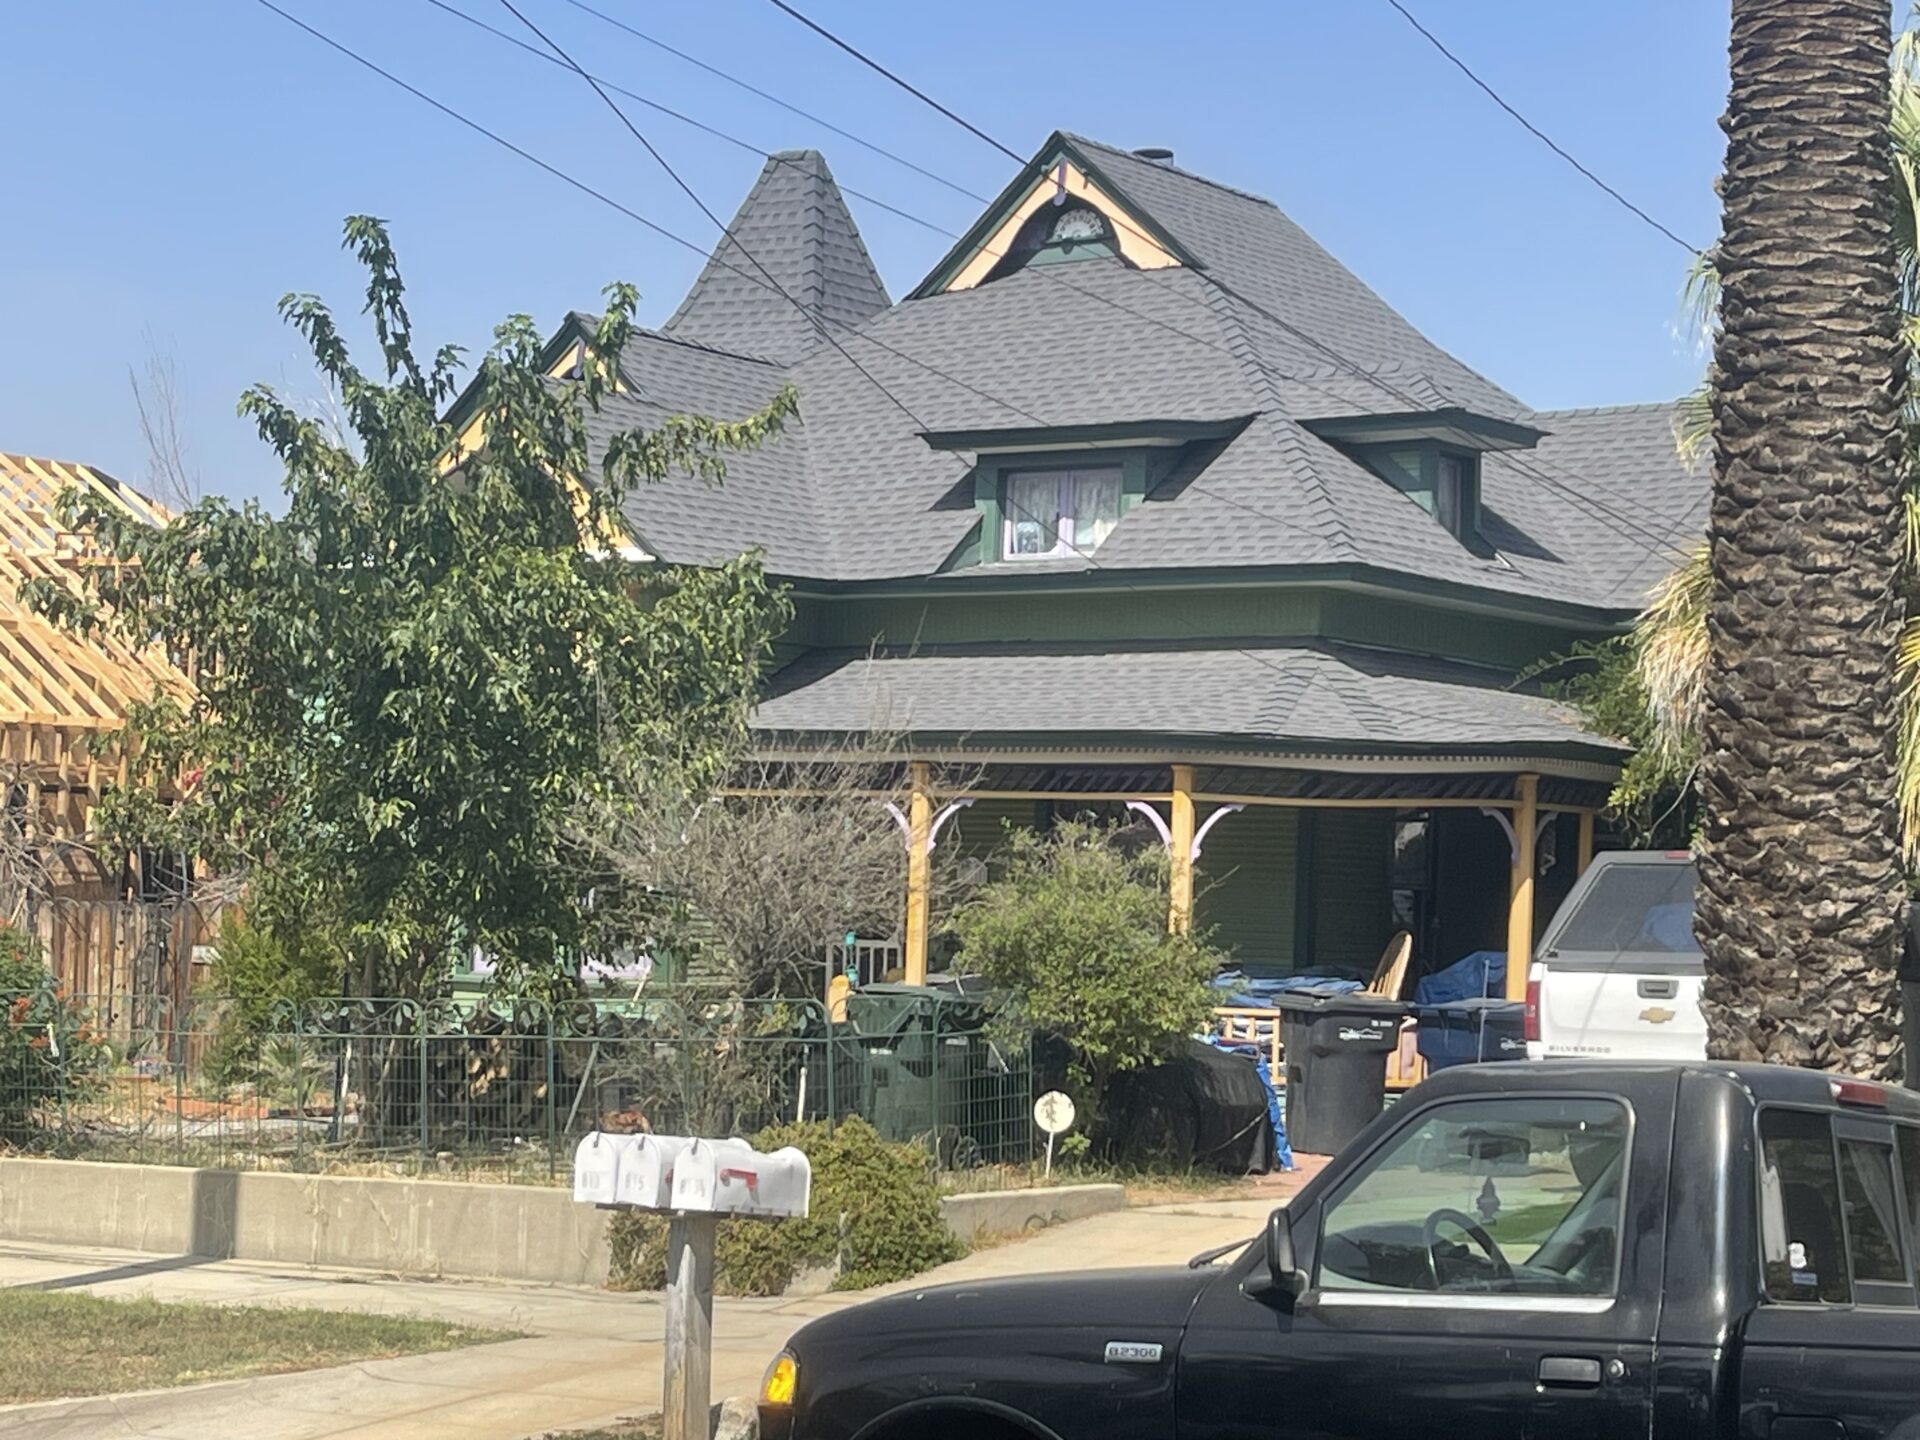 Lacock Family home in Redlands, Ca. this project was quite special with both its high Sloop roofing and intracity of its design. Also required some wood replacement due to its age.